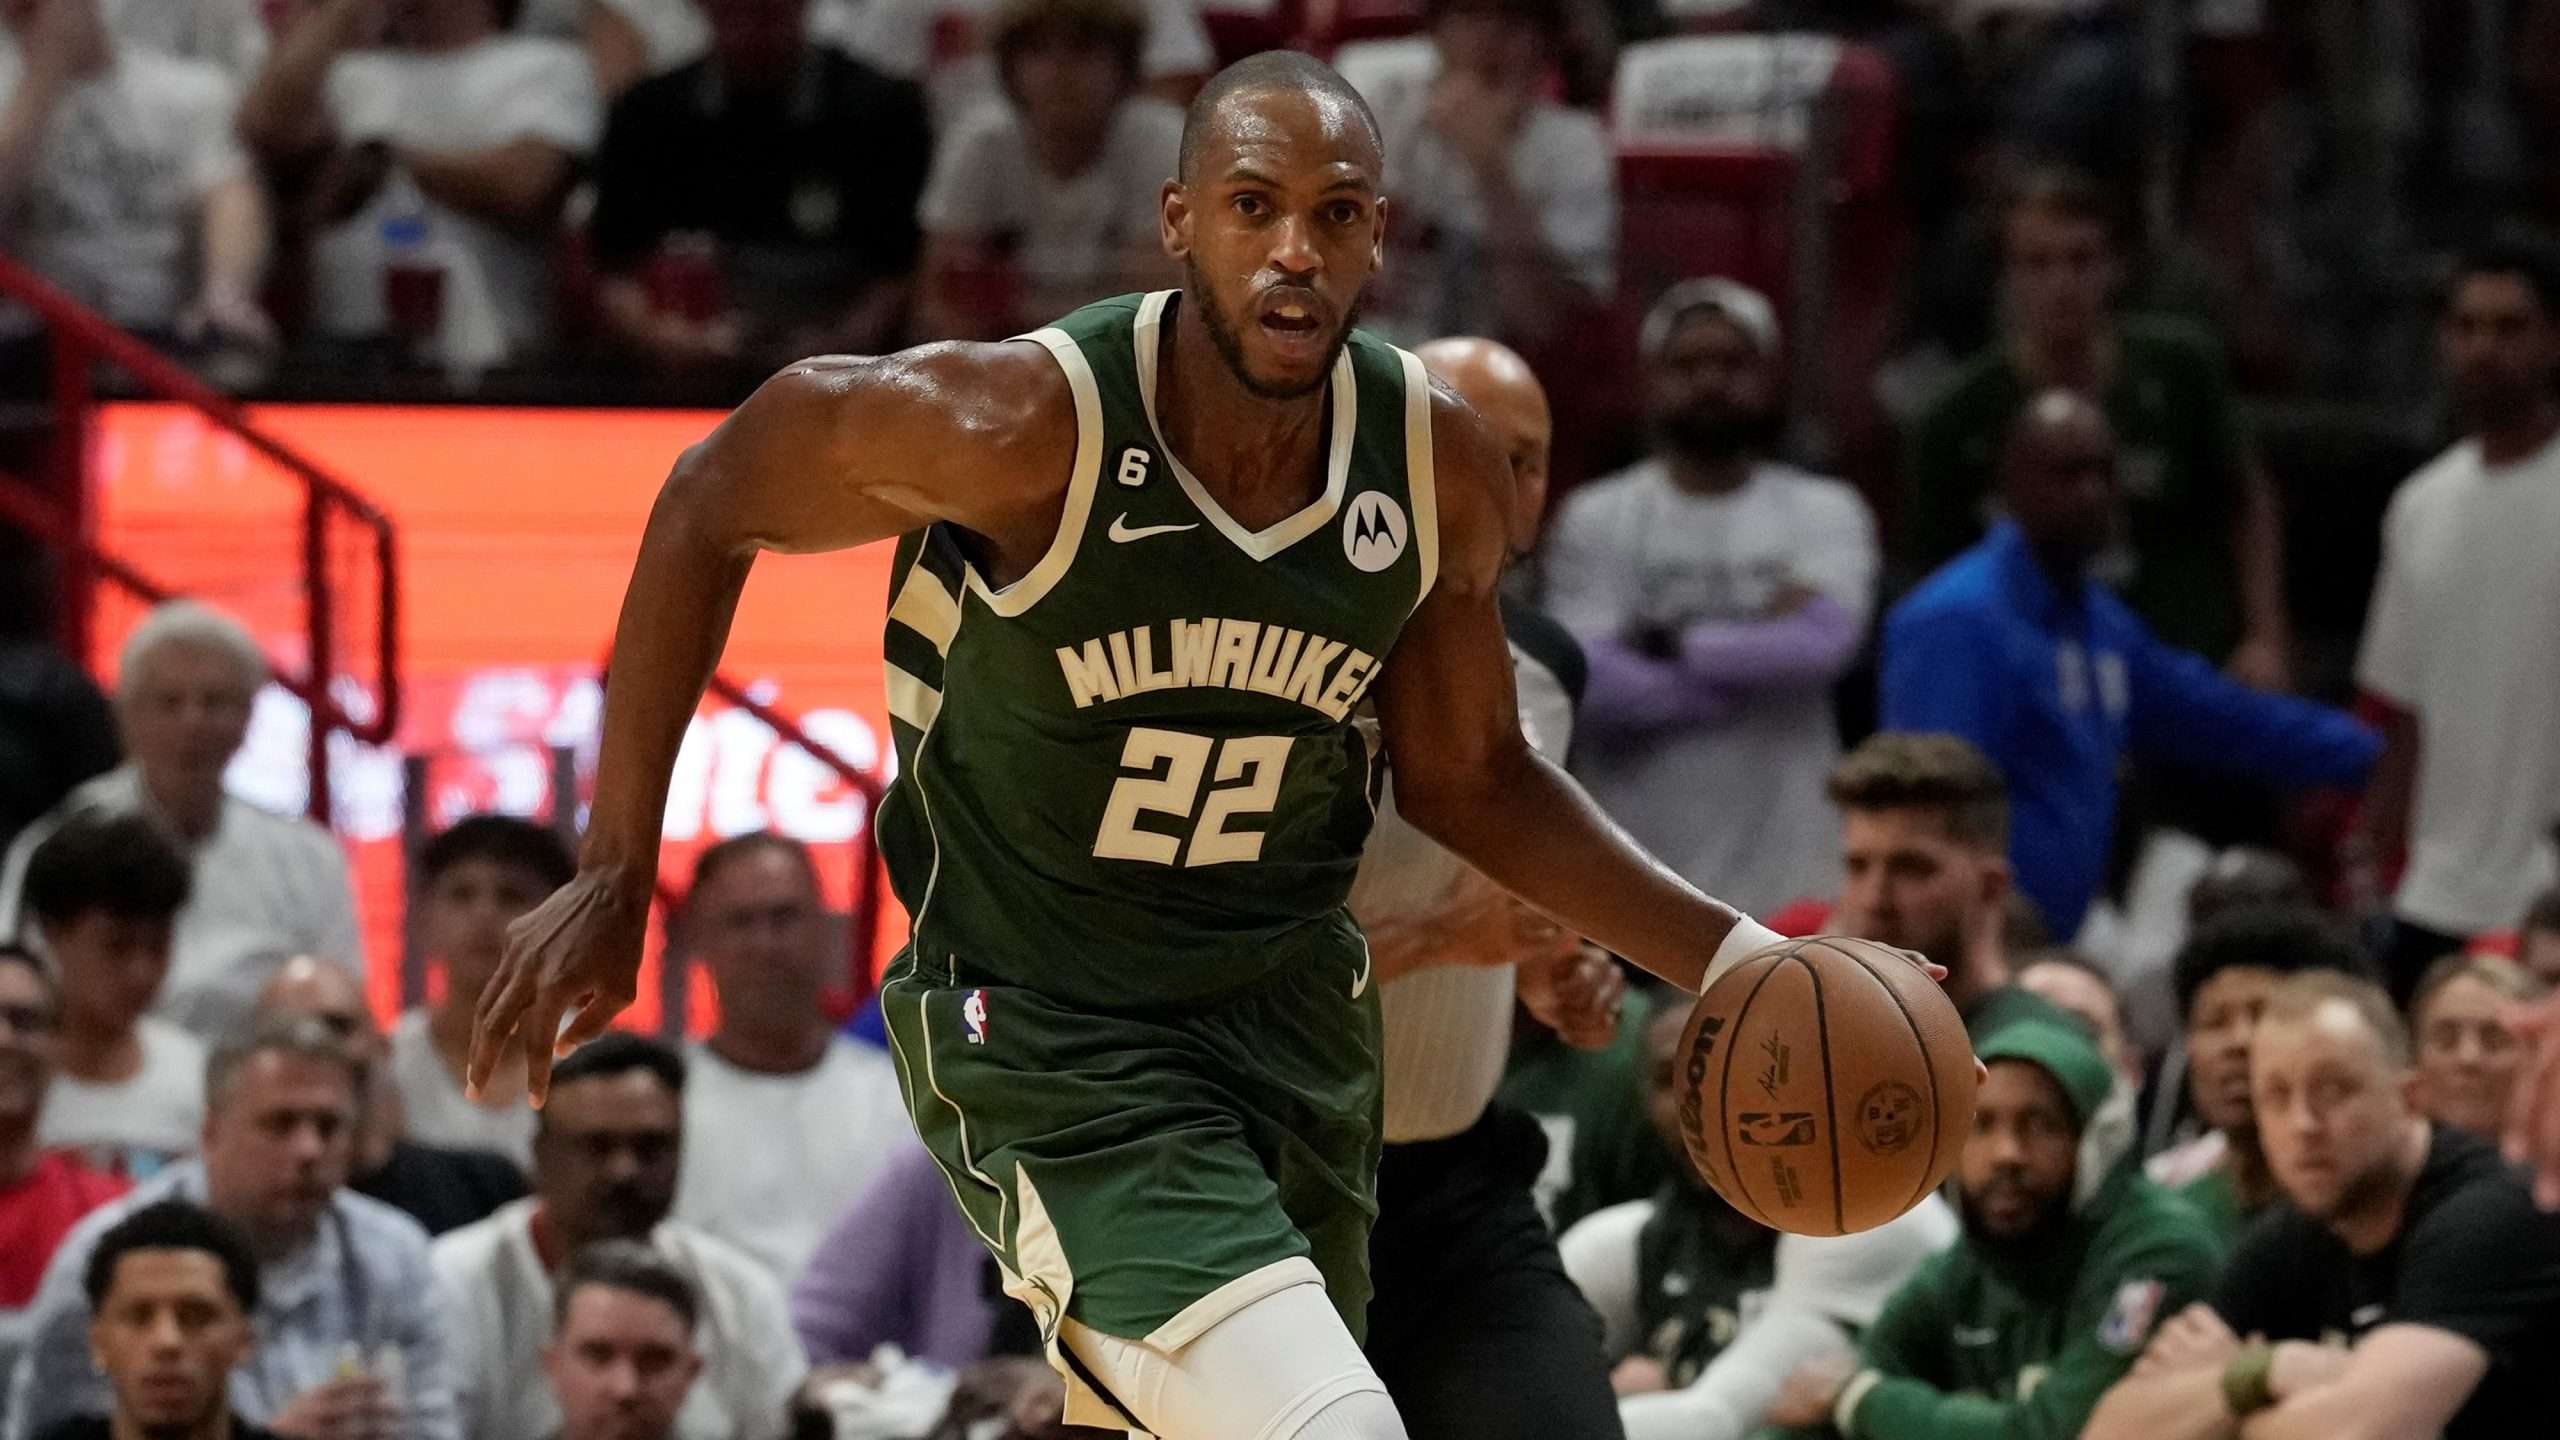 Bucks star Giannis doesn't want to lose Khris Middleton in free